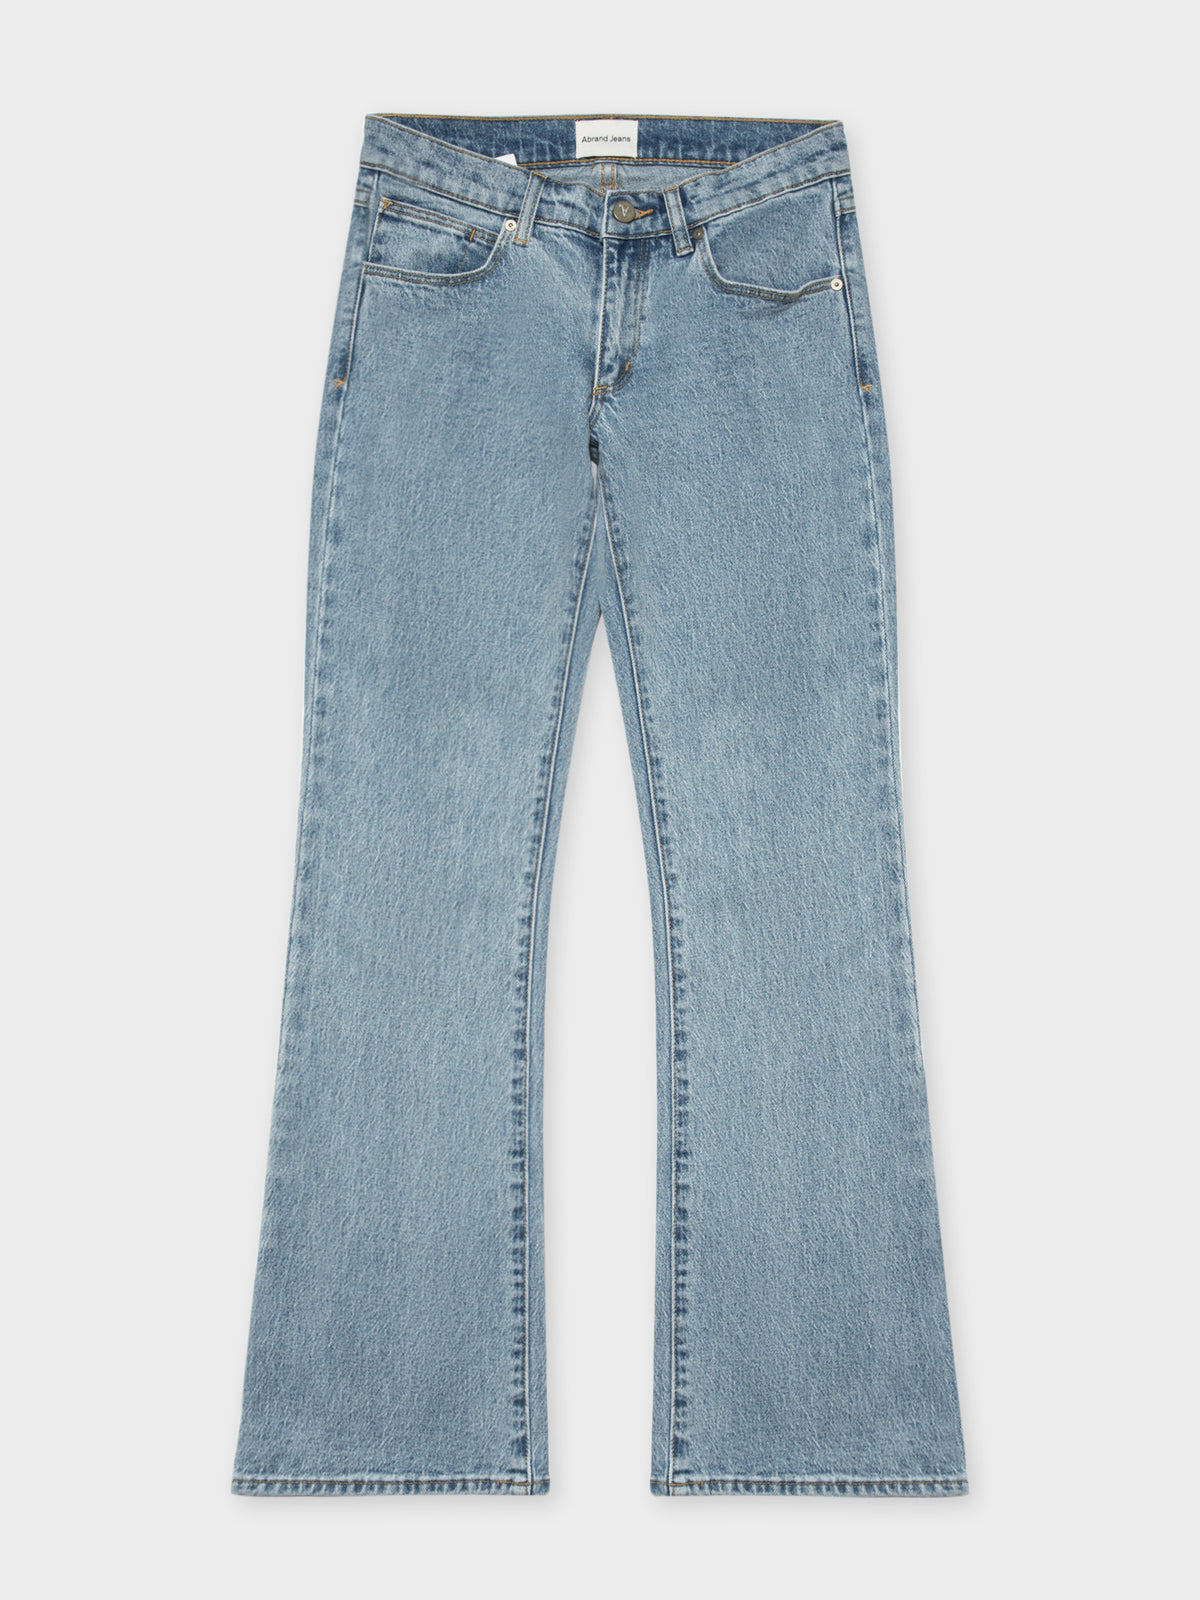 A 99 Low-Rise Boot Leg Jeans in Ariane Blue